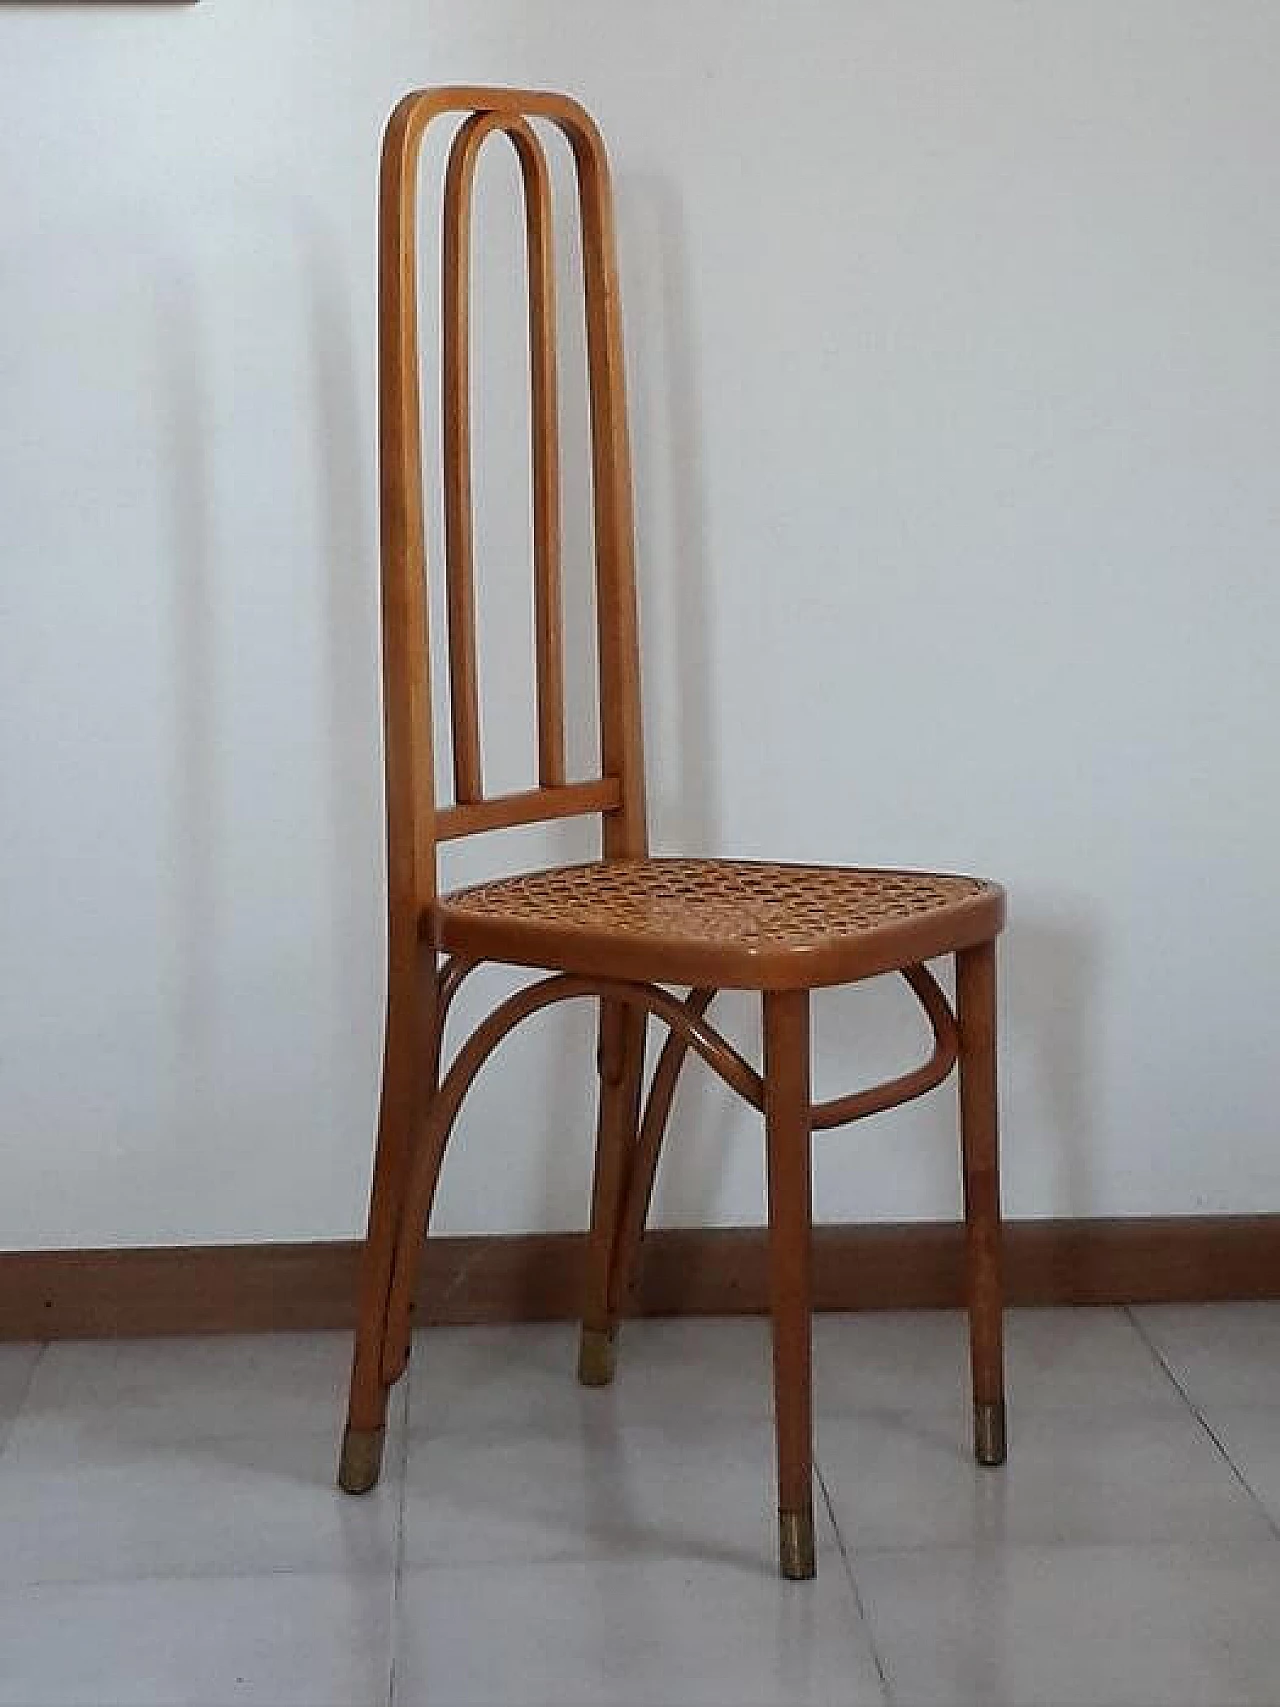 Chair 246 in blond beech manufactured by Società Antonio Volpe, 20th century 1